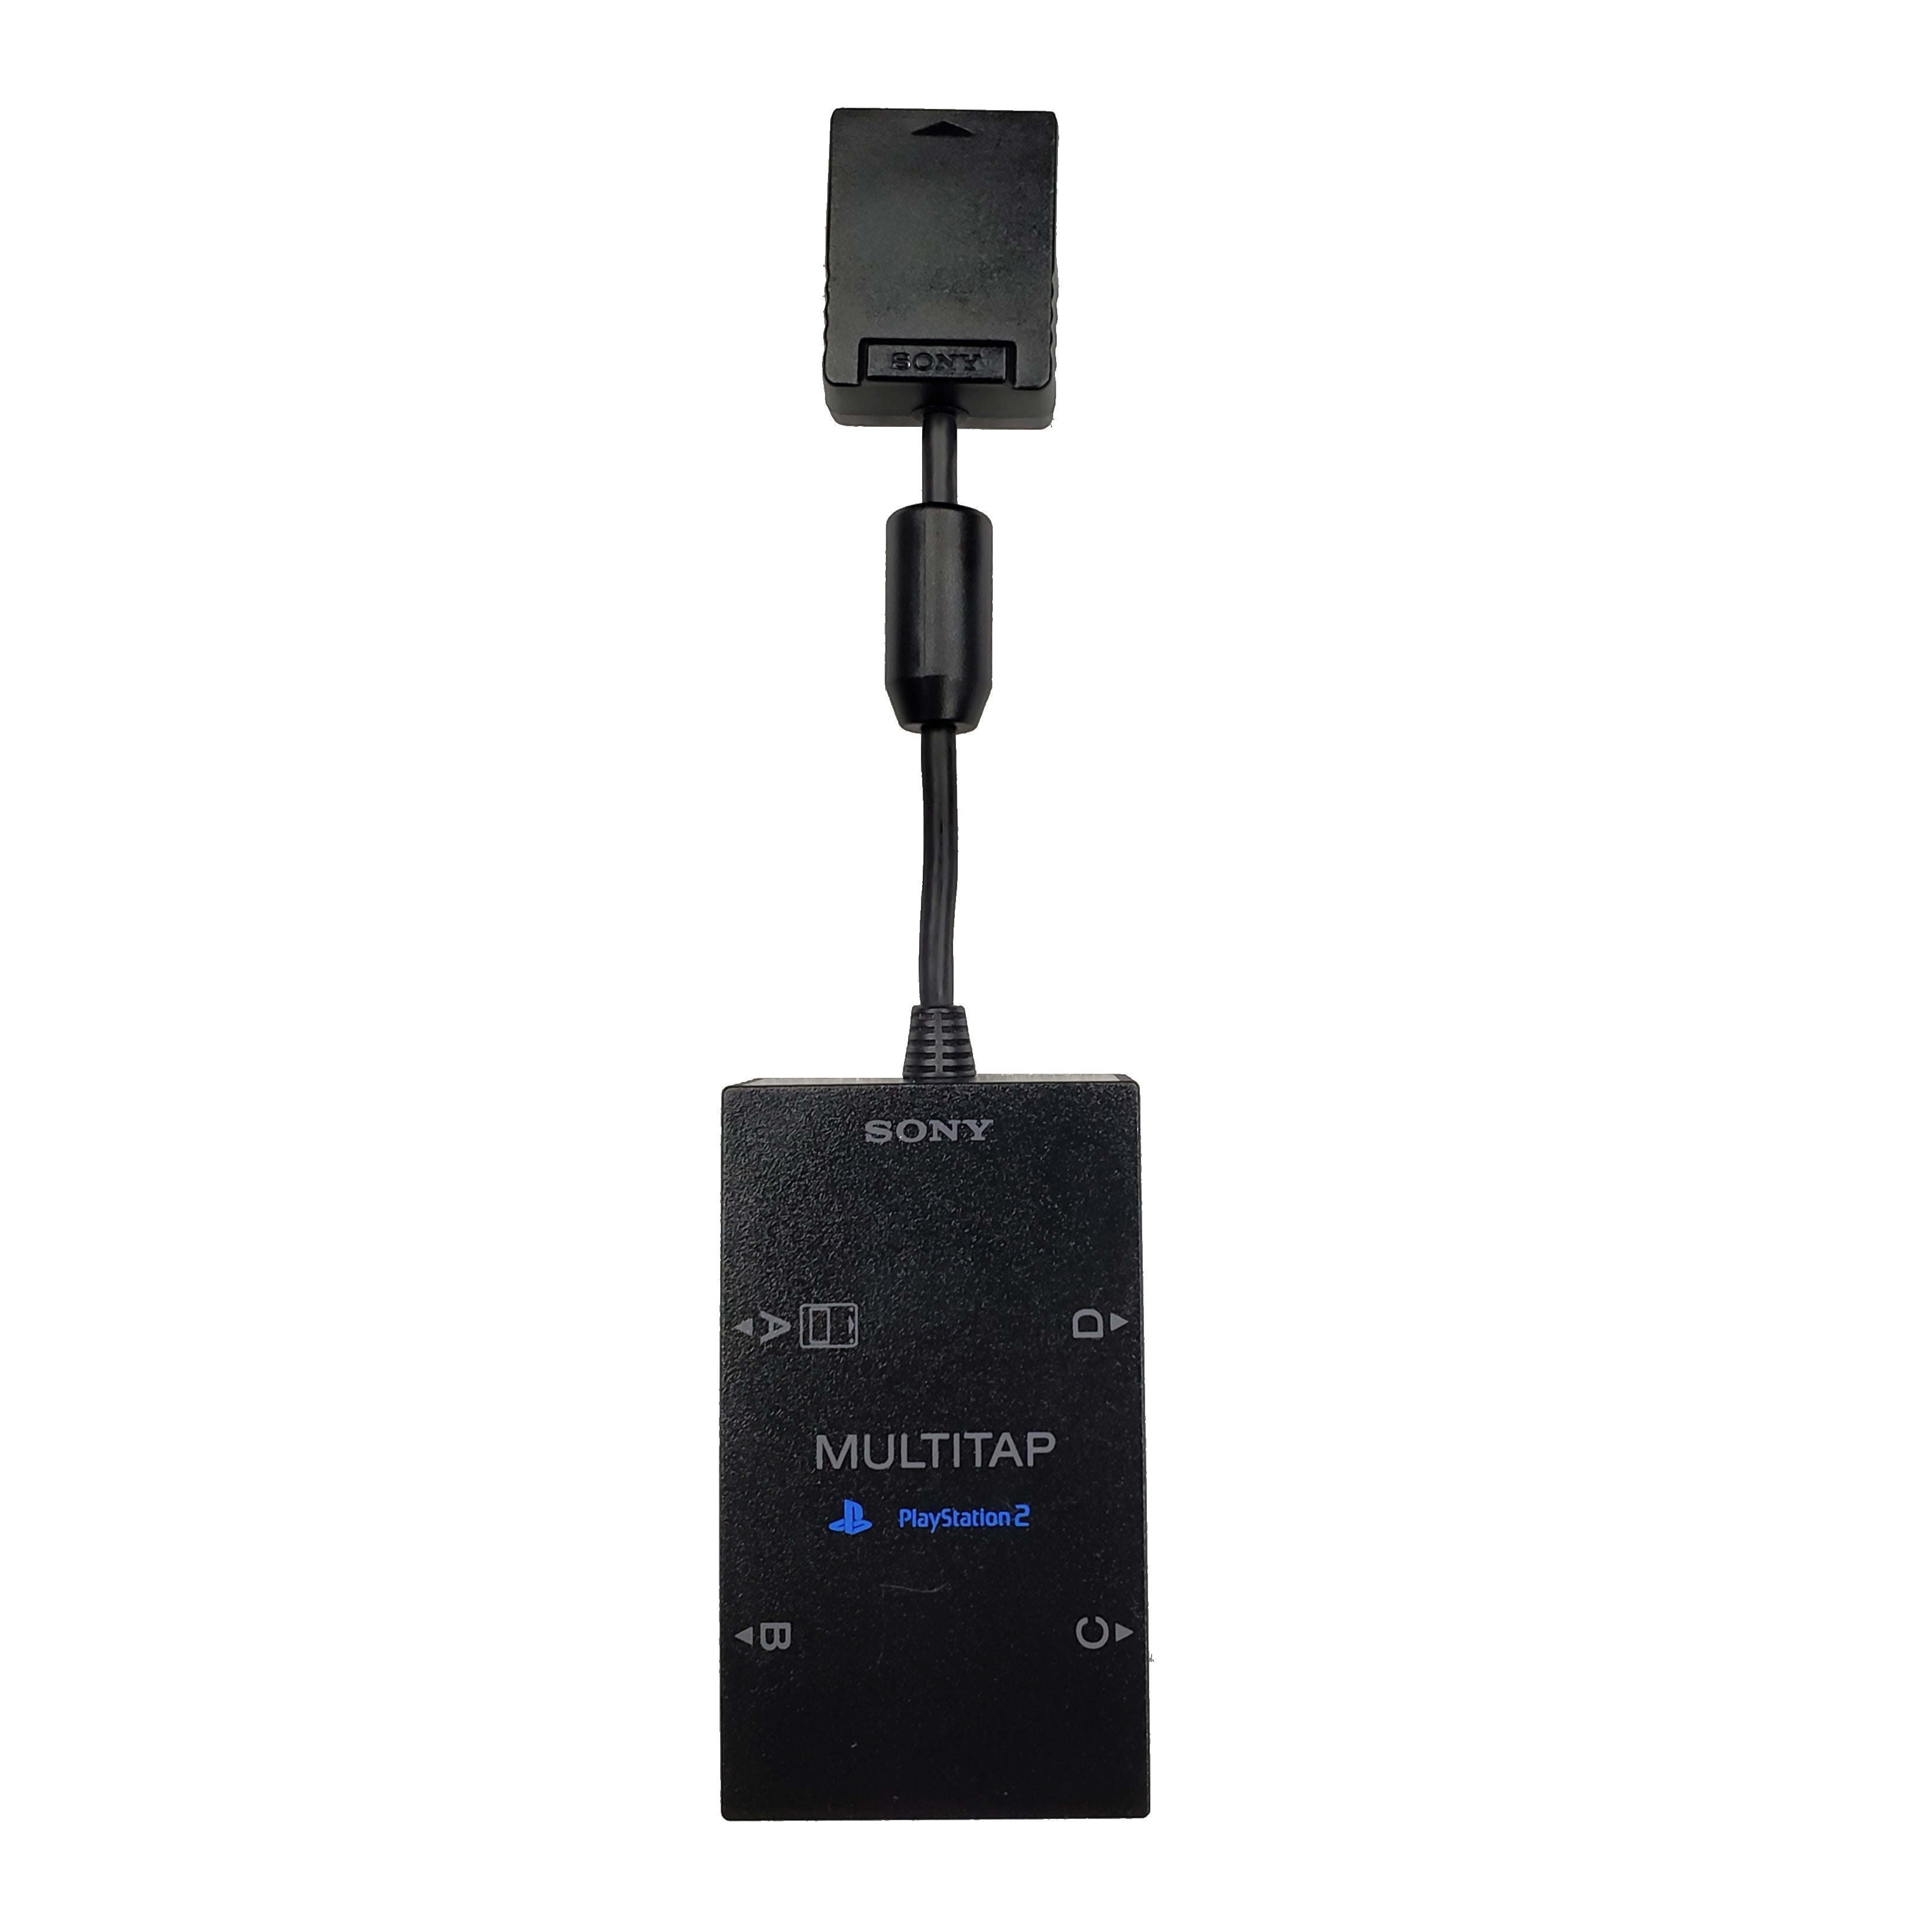 Sony PlayStation 2 (PS2) Multitap